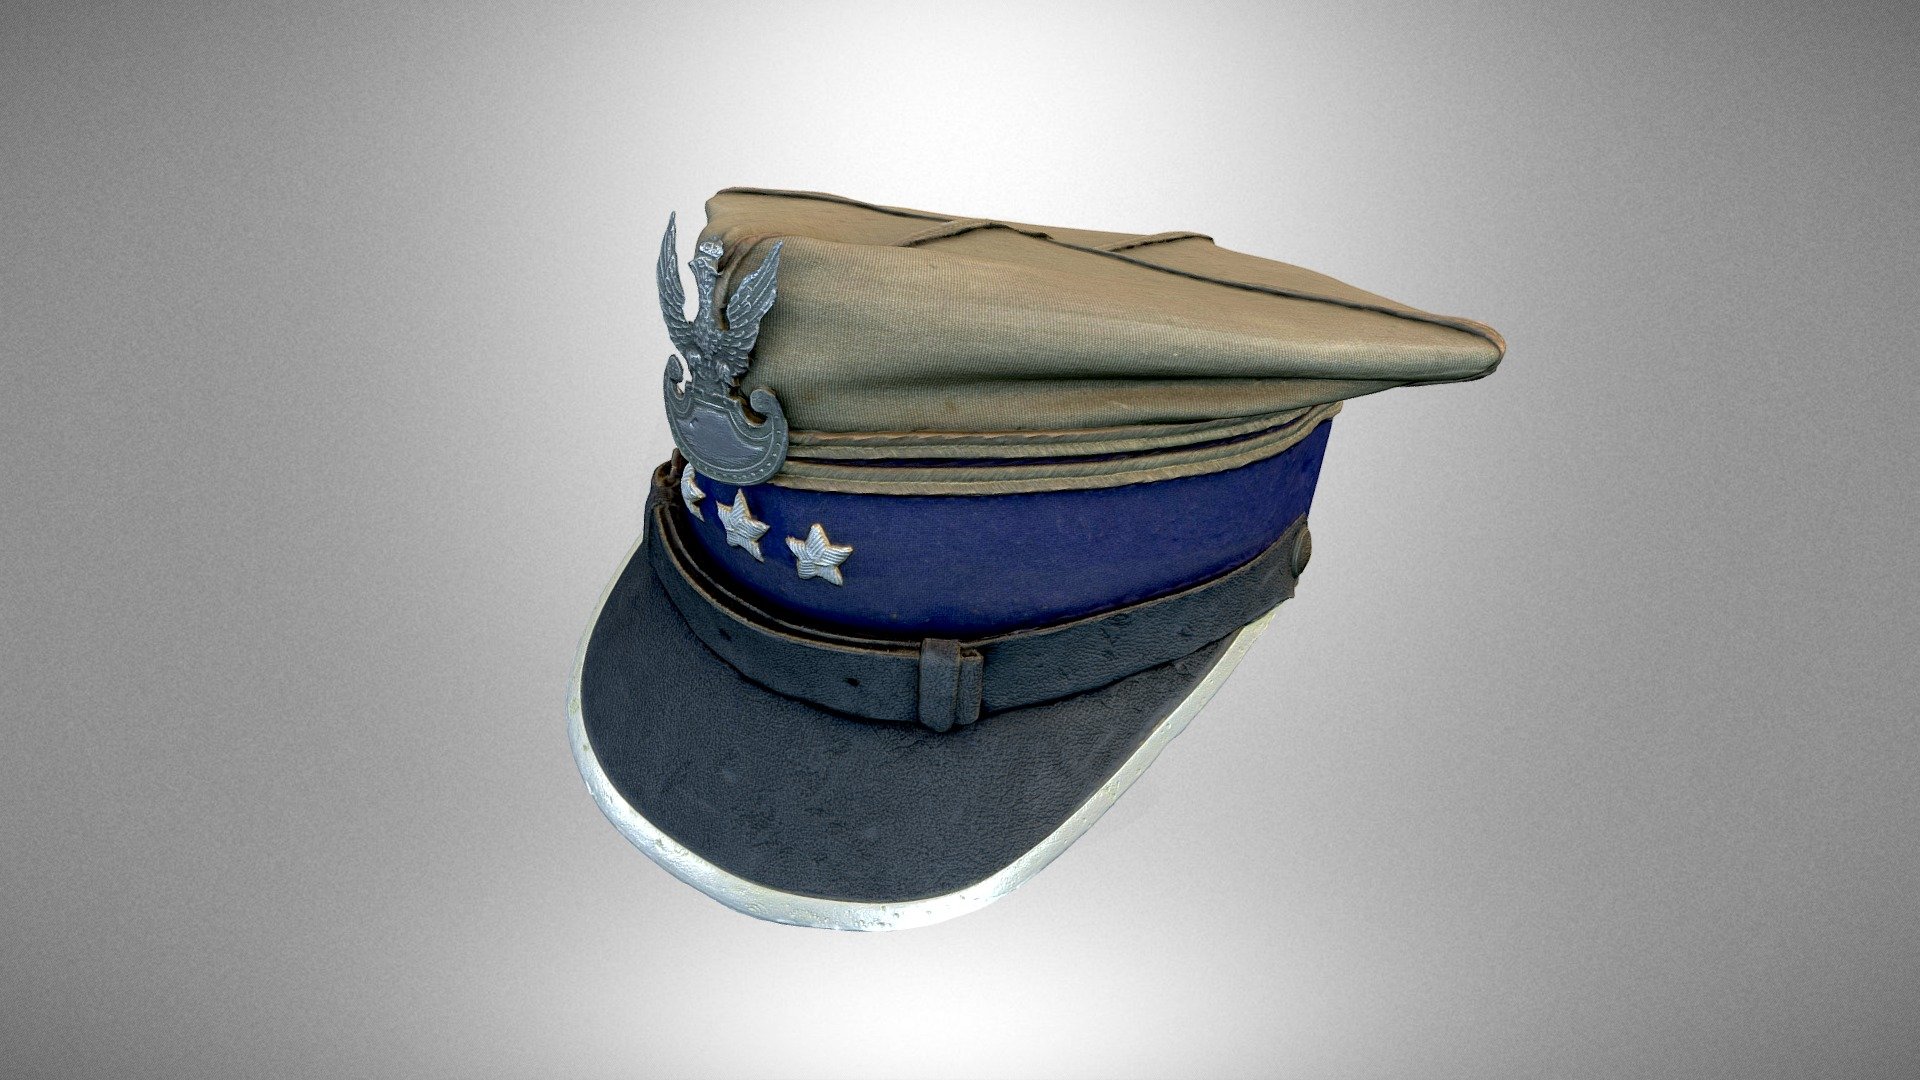 Rogatywka [a military service, four-pointed cap]